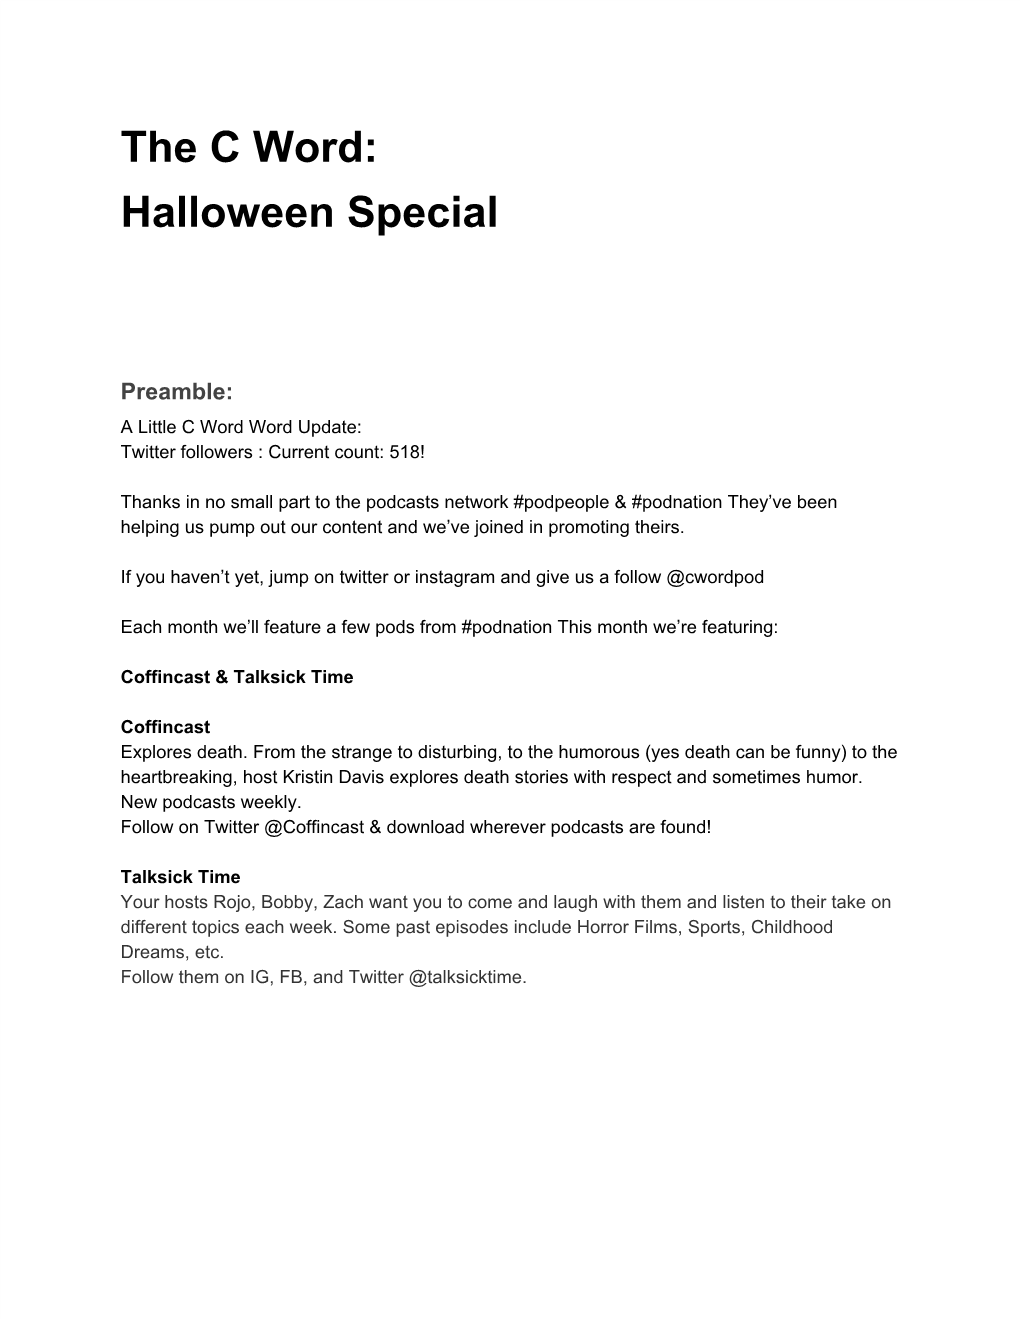 The C Word: Halloween Special